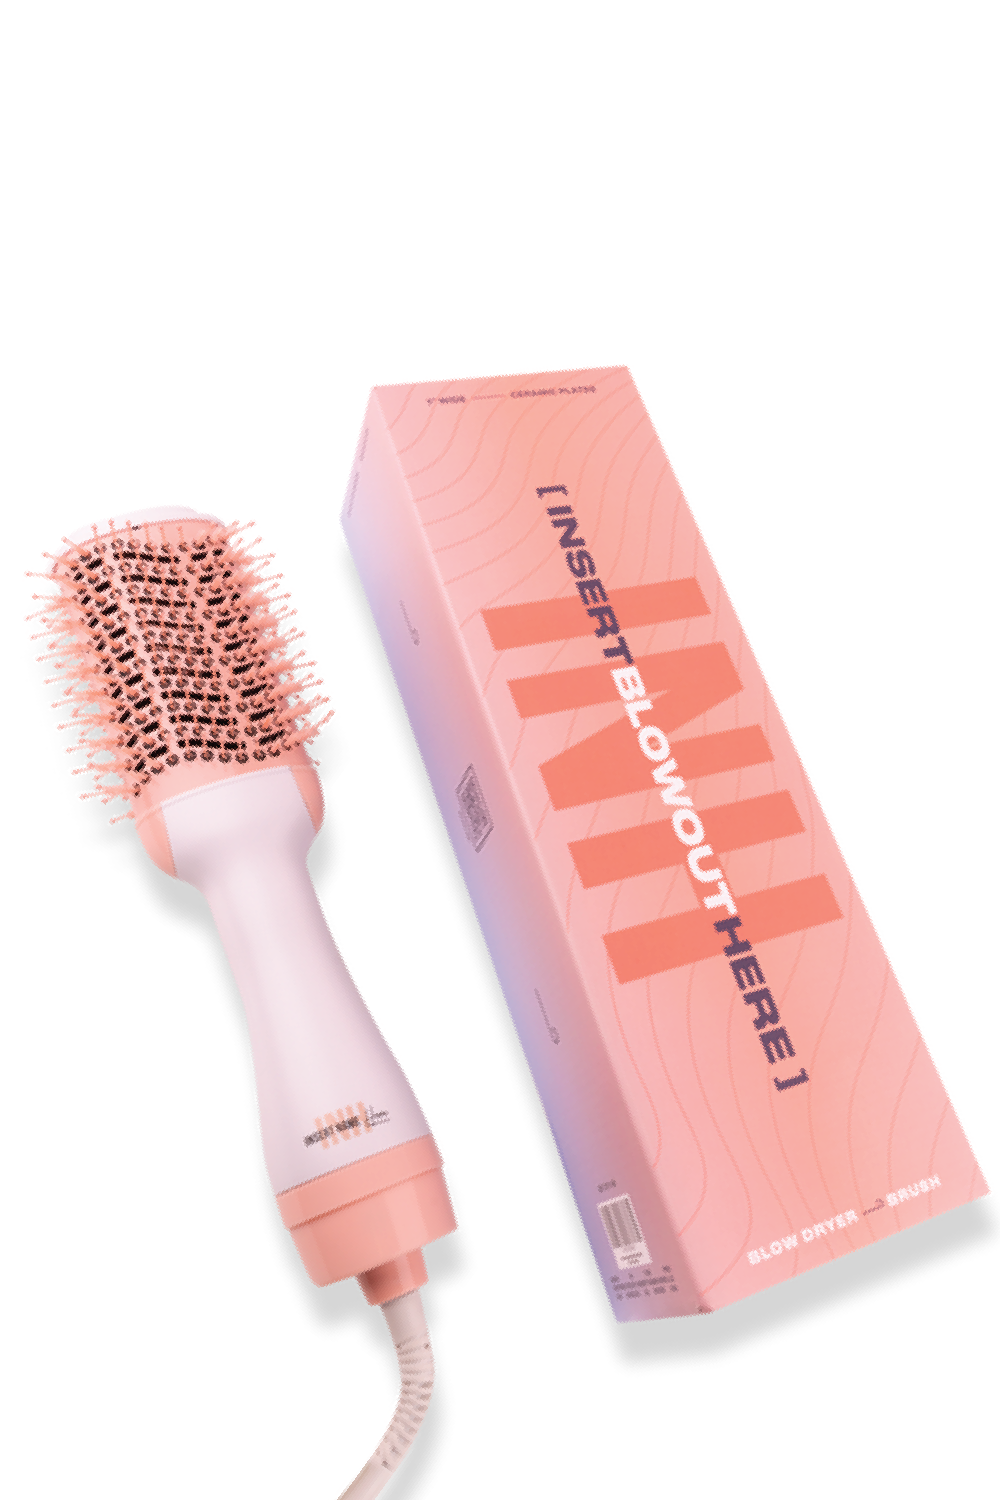 These hair dryer brushes will give you a salonstyle blowout